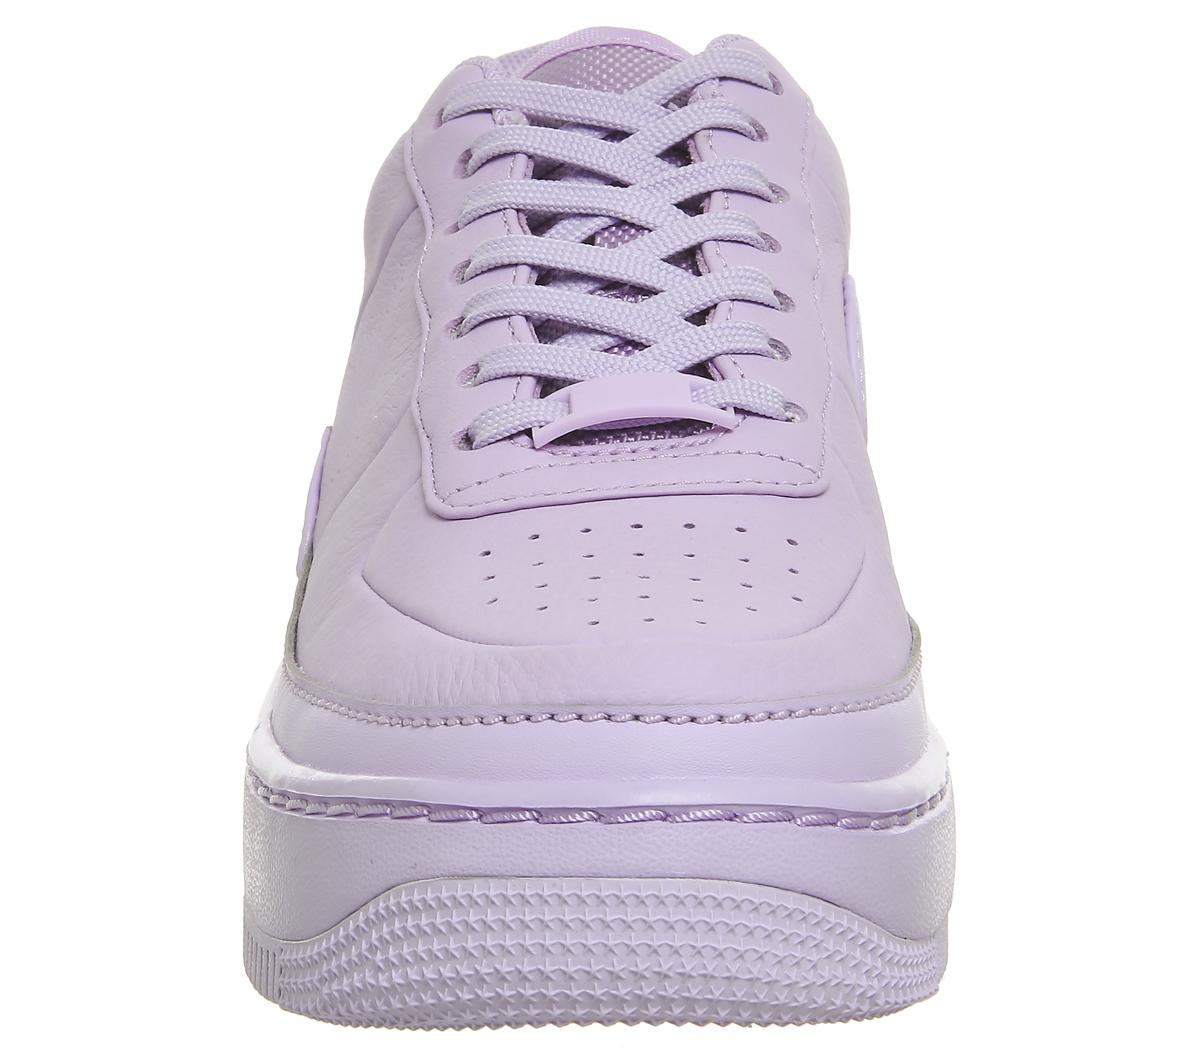 air force jester purple